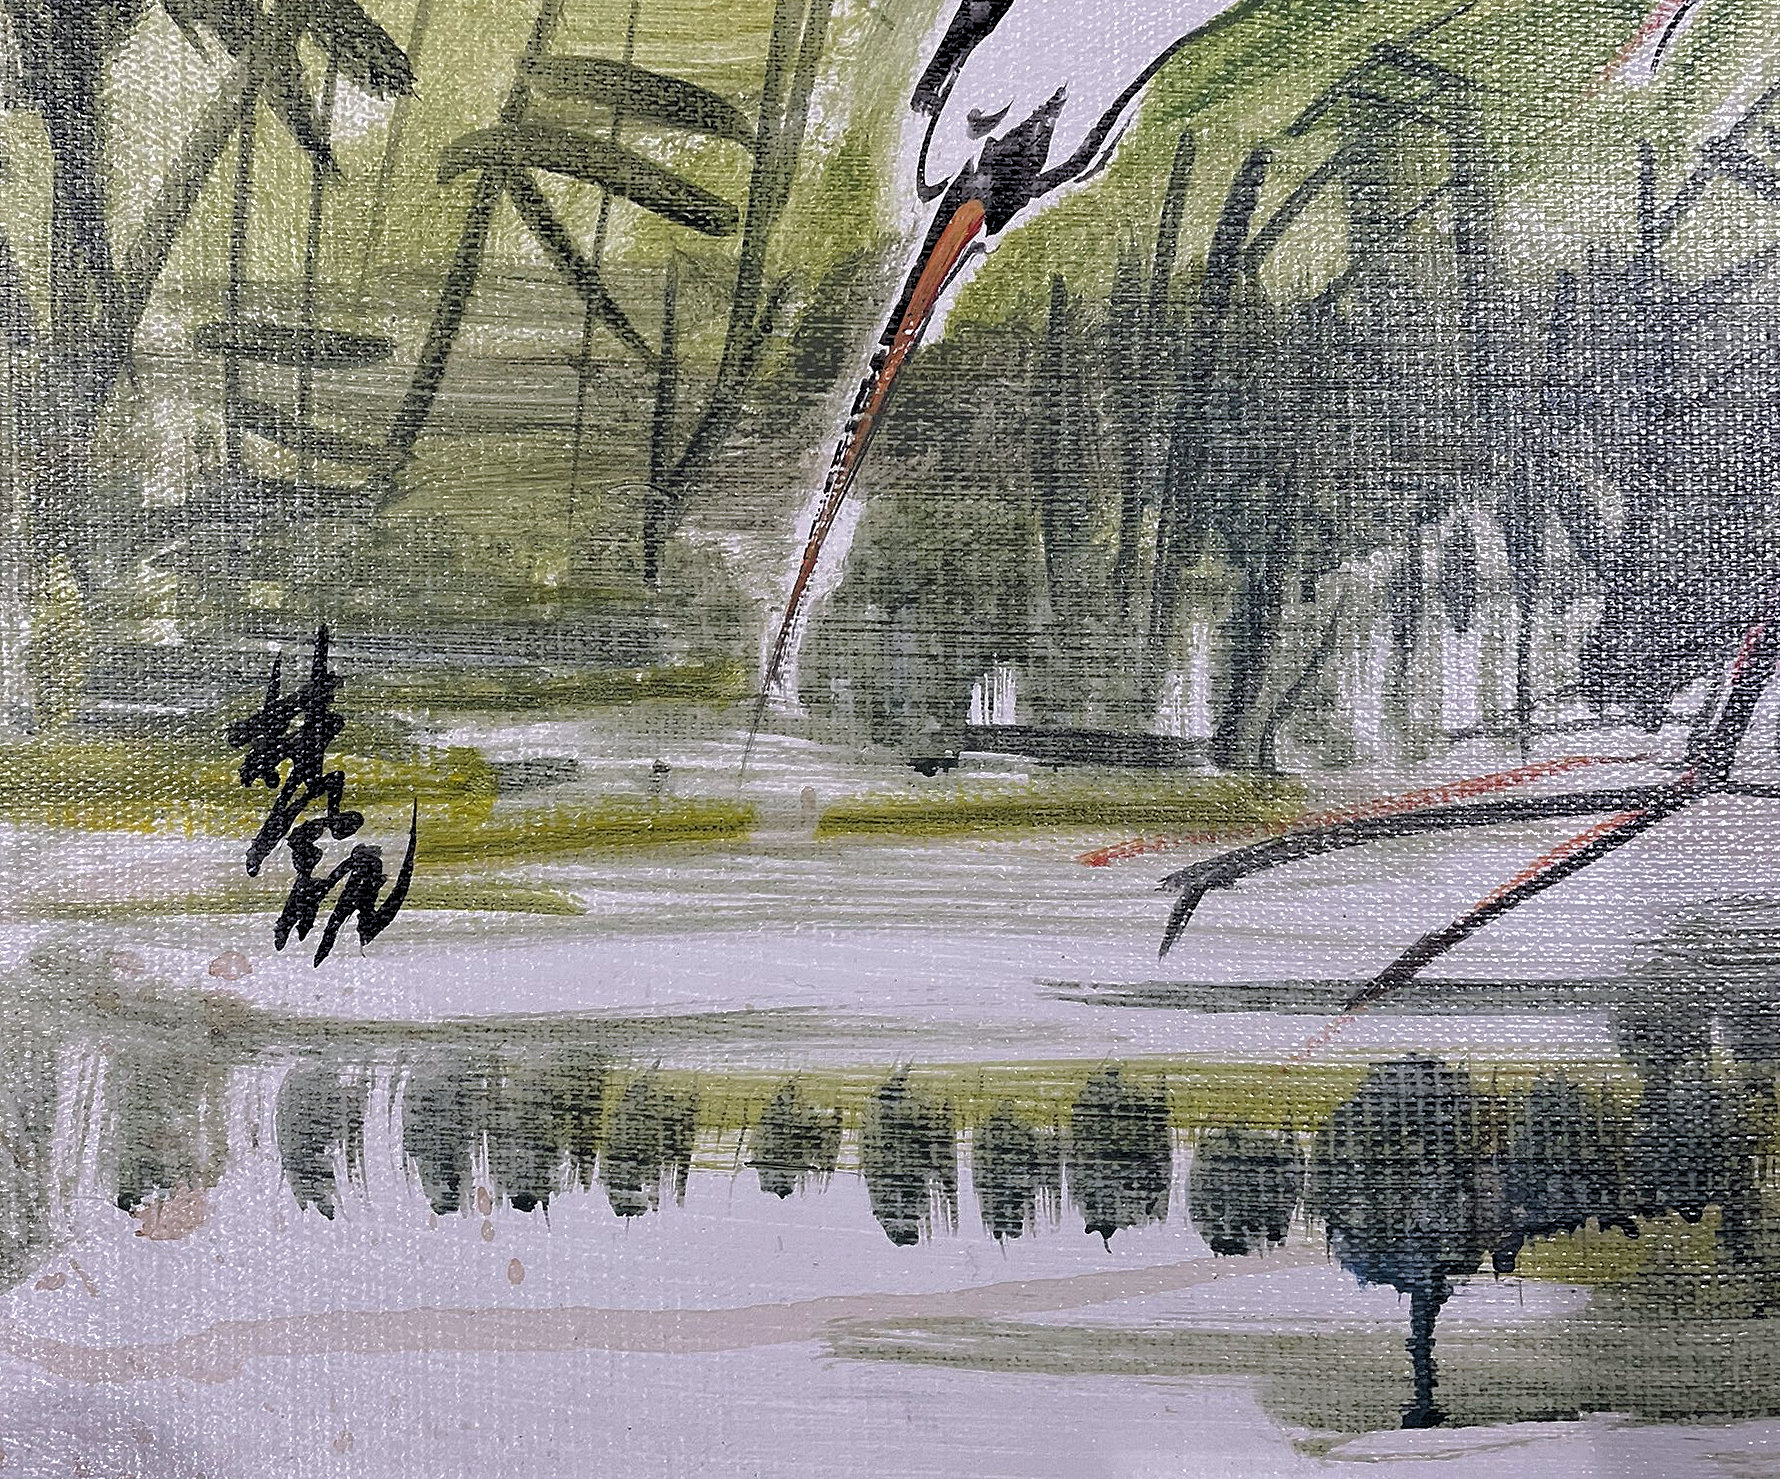 LIN FENGMIAN 林风眠 (1900-1991) - PAIR OF HERONS 双鹭 - Image 5 of 8